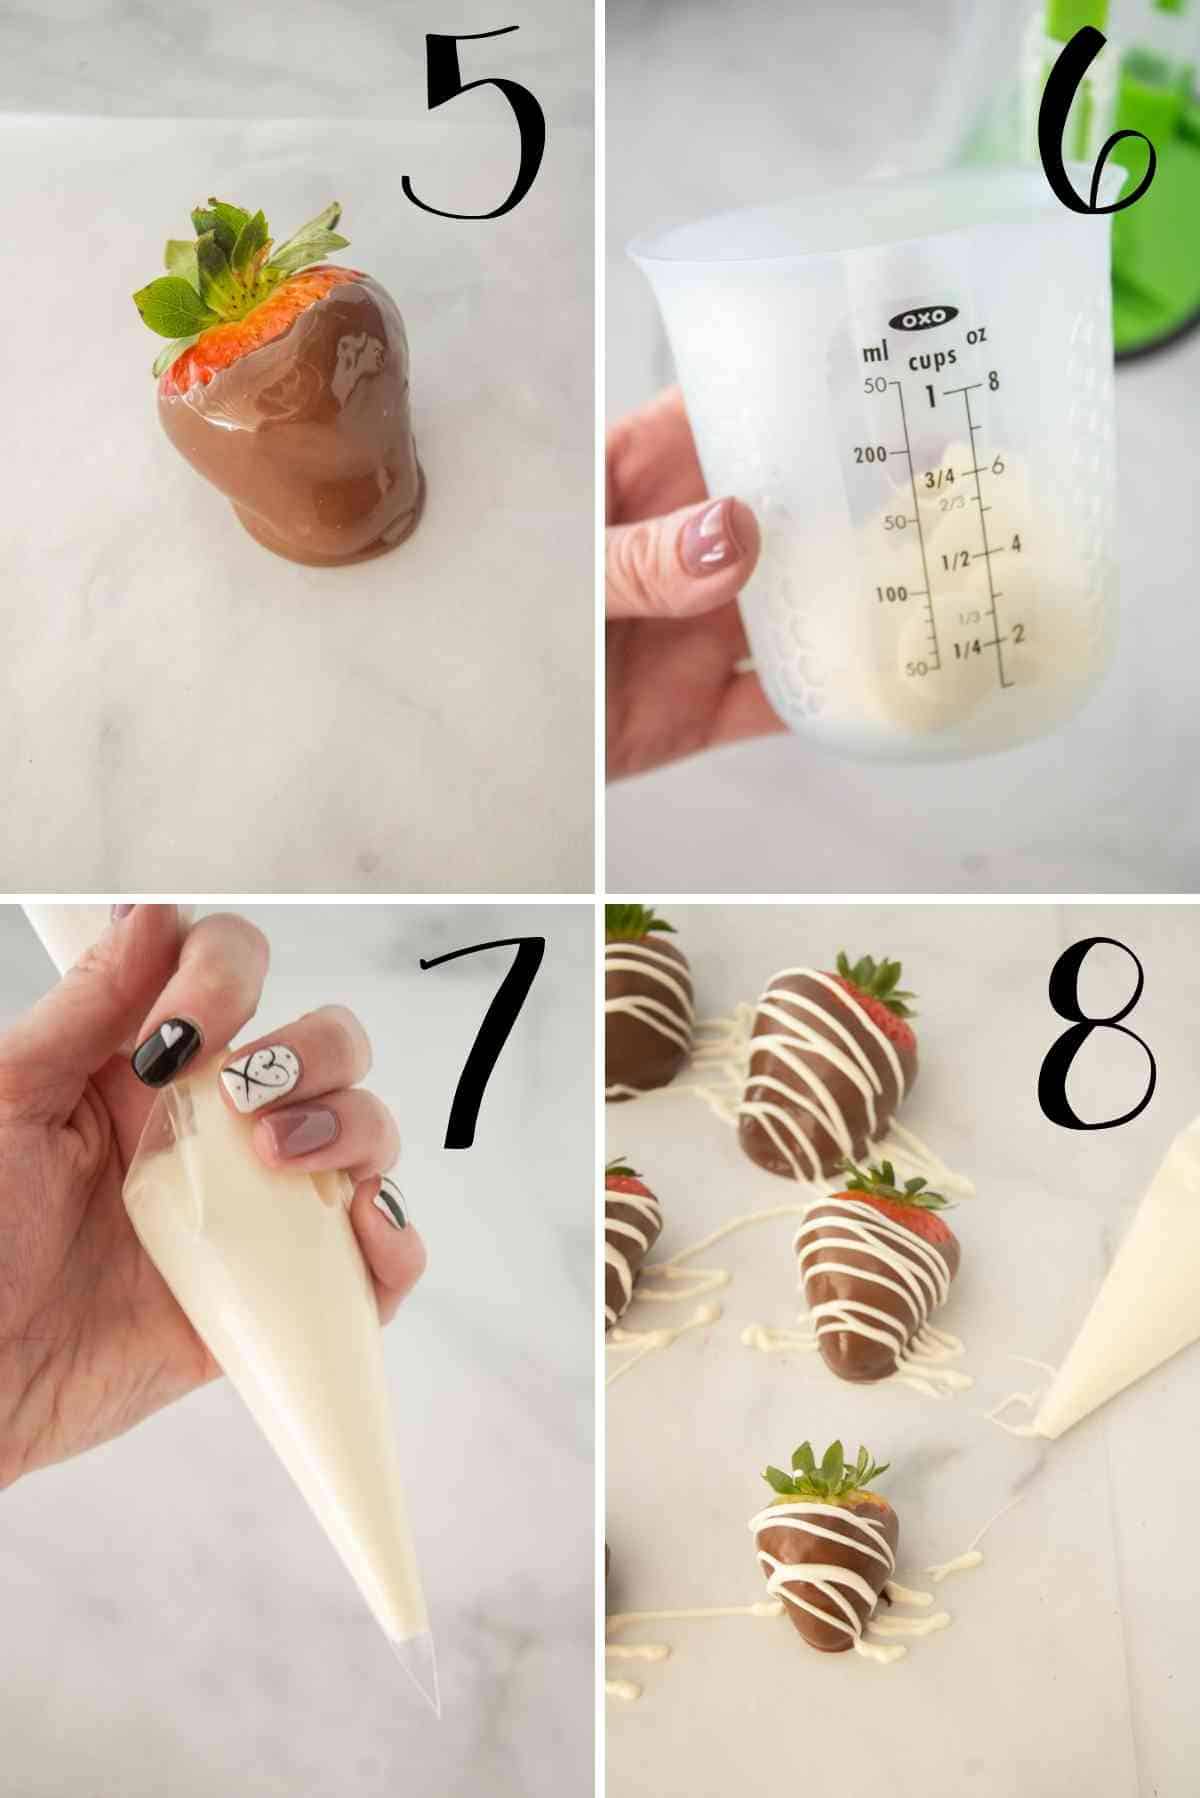 Chocolate dipped strawberries with a white chocolate drizzle!